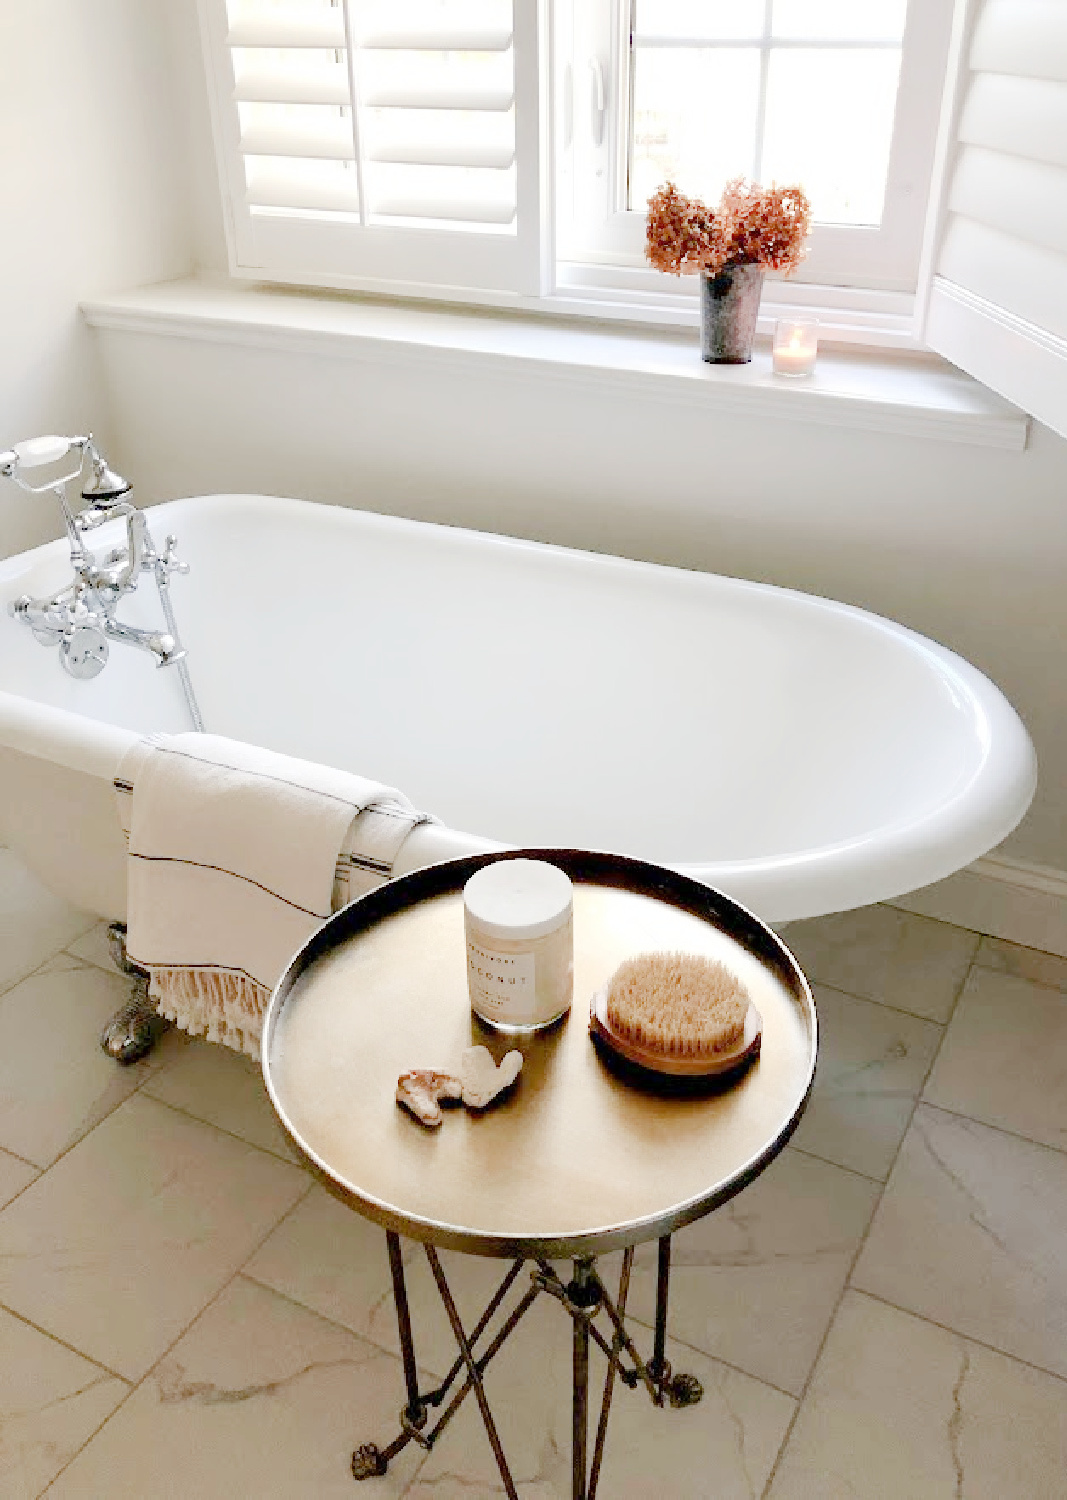 Serene vintage style white bath with clawfoot tub, plantation shutters, and staggered marble tile - Hello Lovely Studio. #serenedecor #serenebath